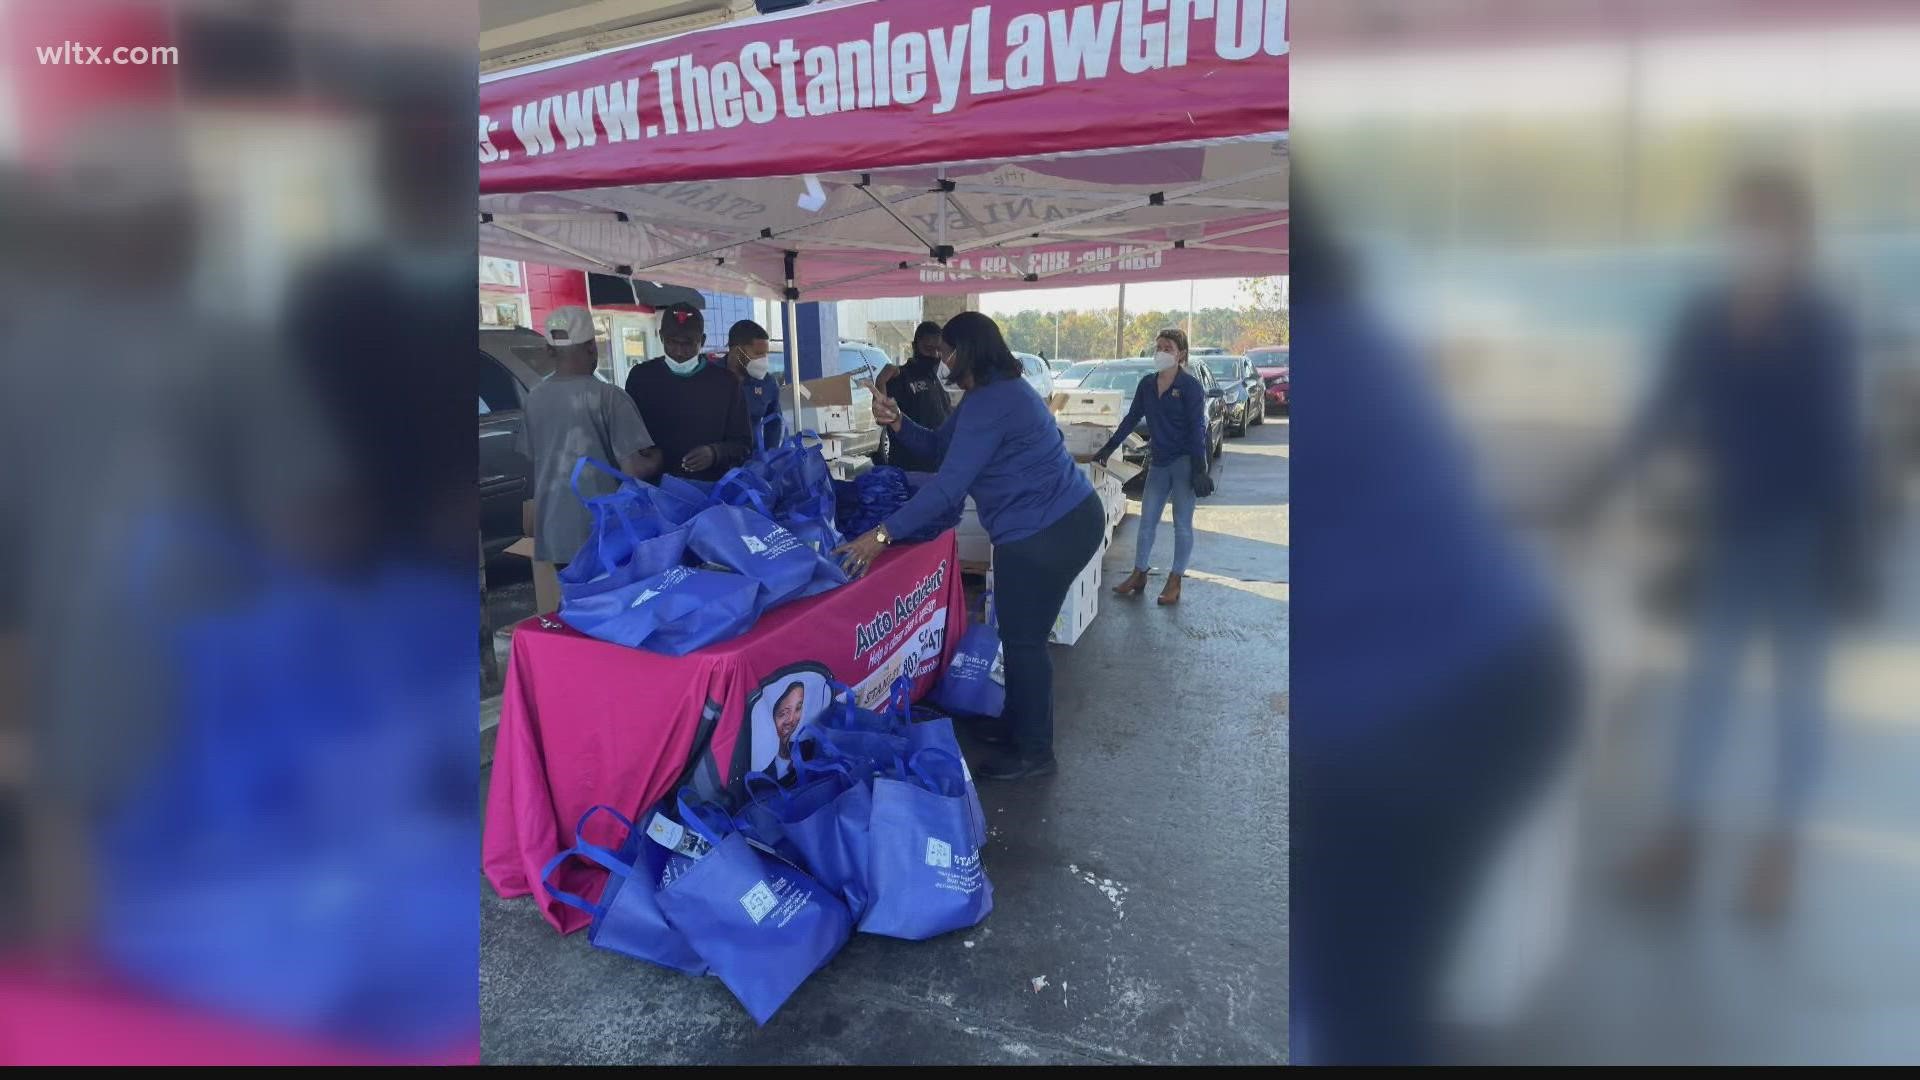 The Stanley Law Group gave away 200 turkeys and dinner fixings today.  The event was supposed to happen at noon but many arrived early and all turkeys were given out